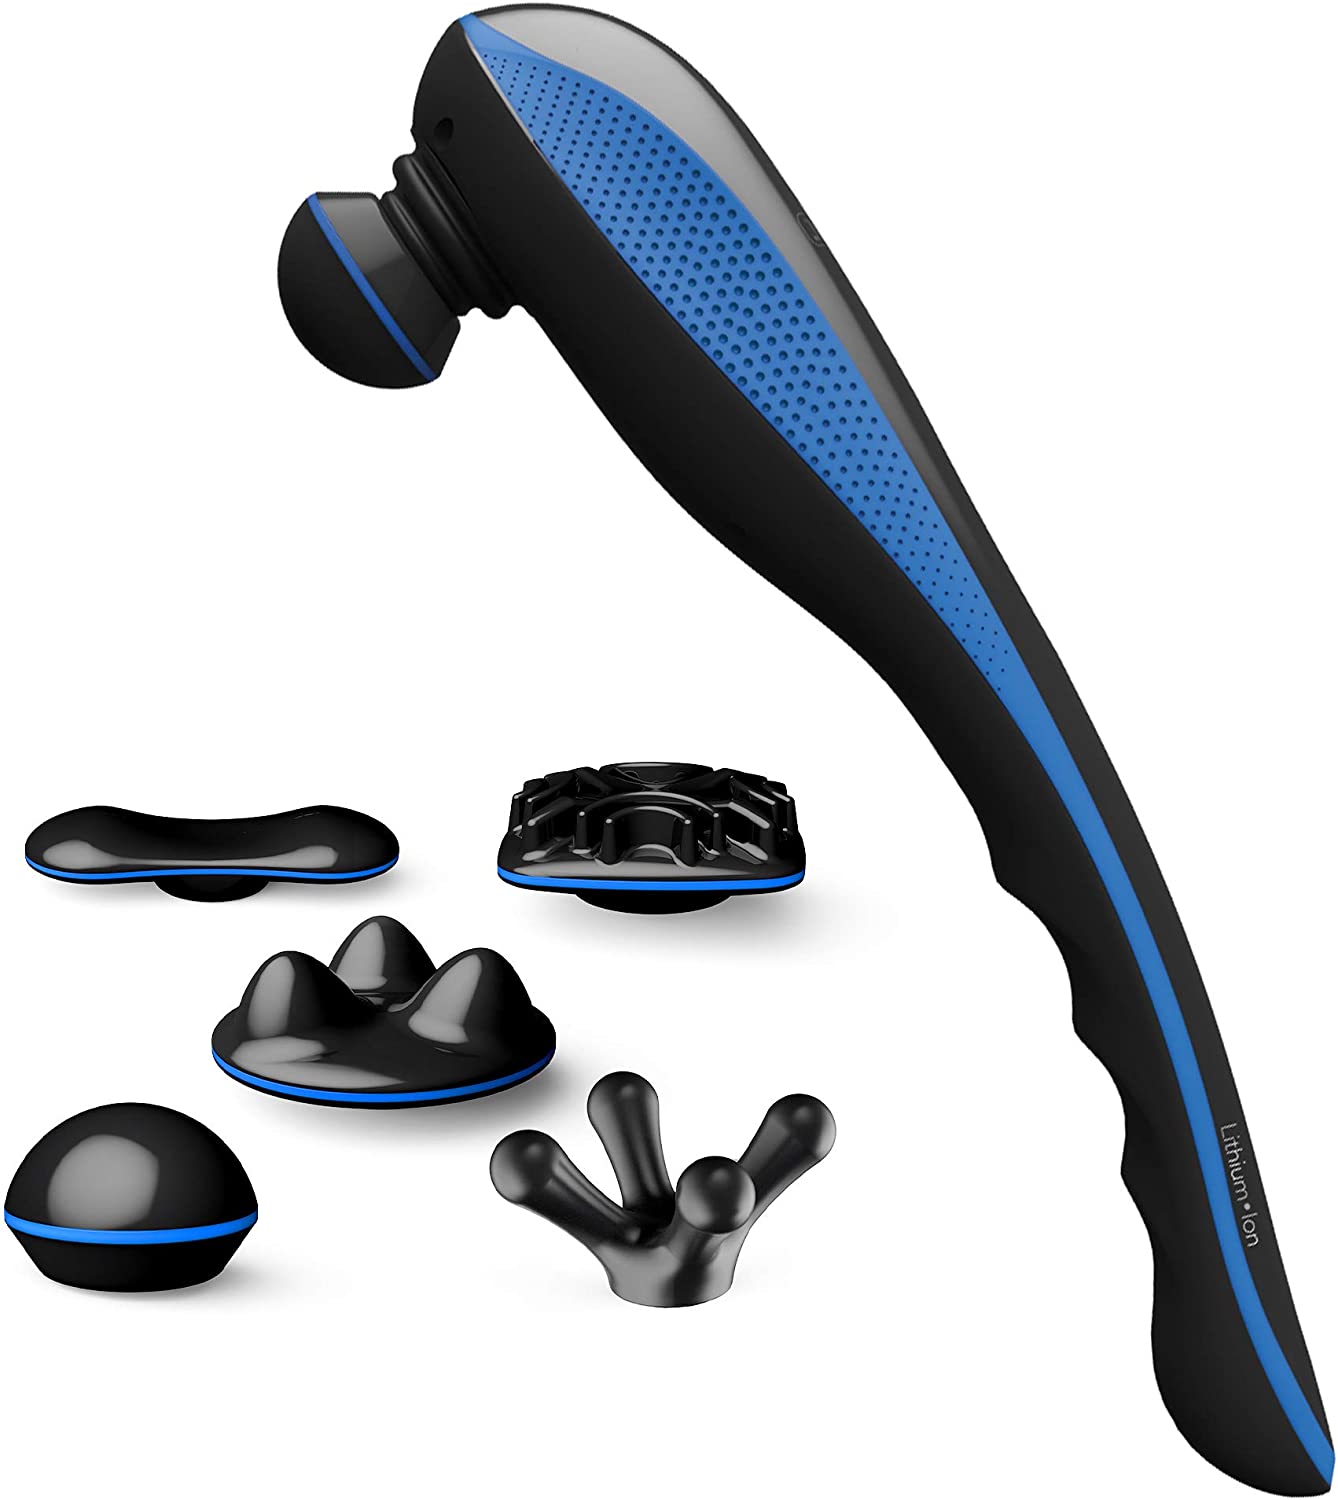 percussion massager